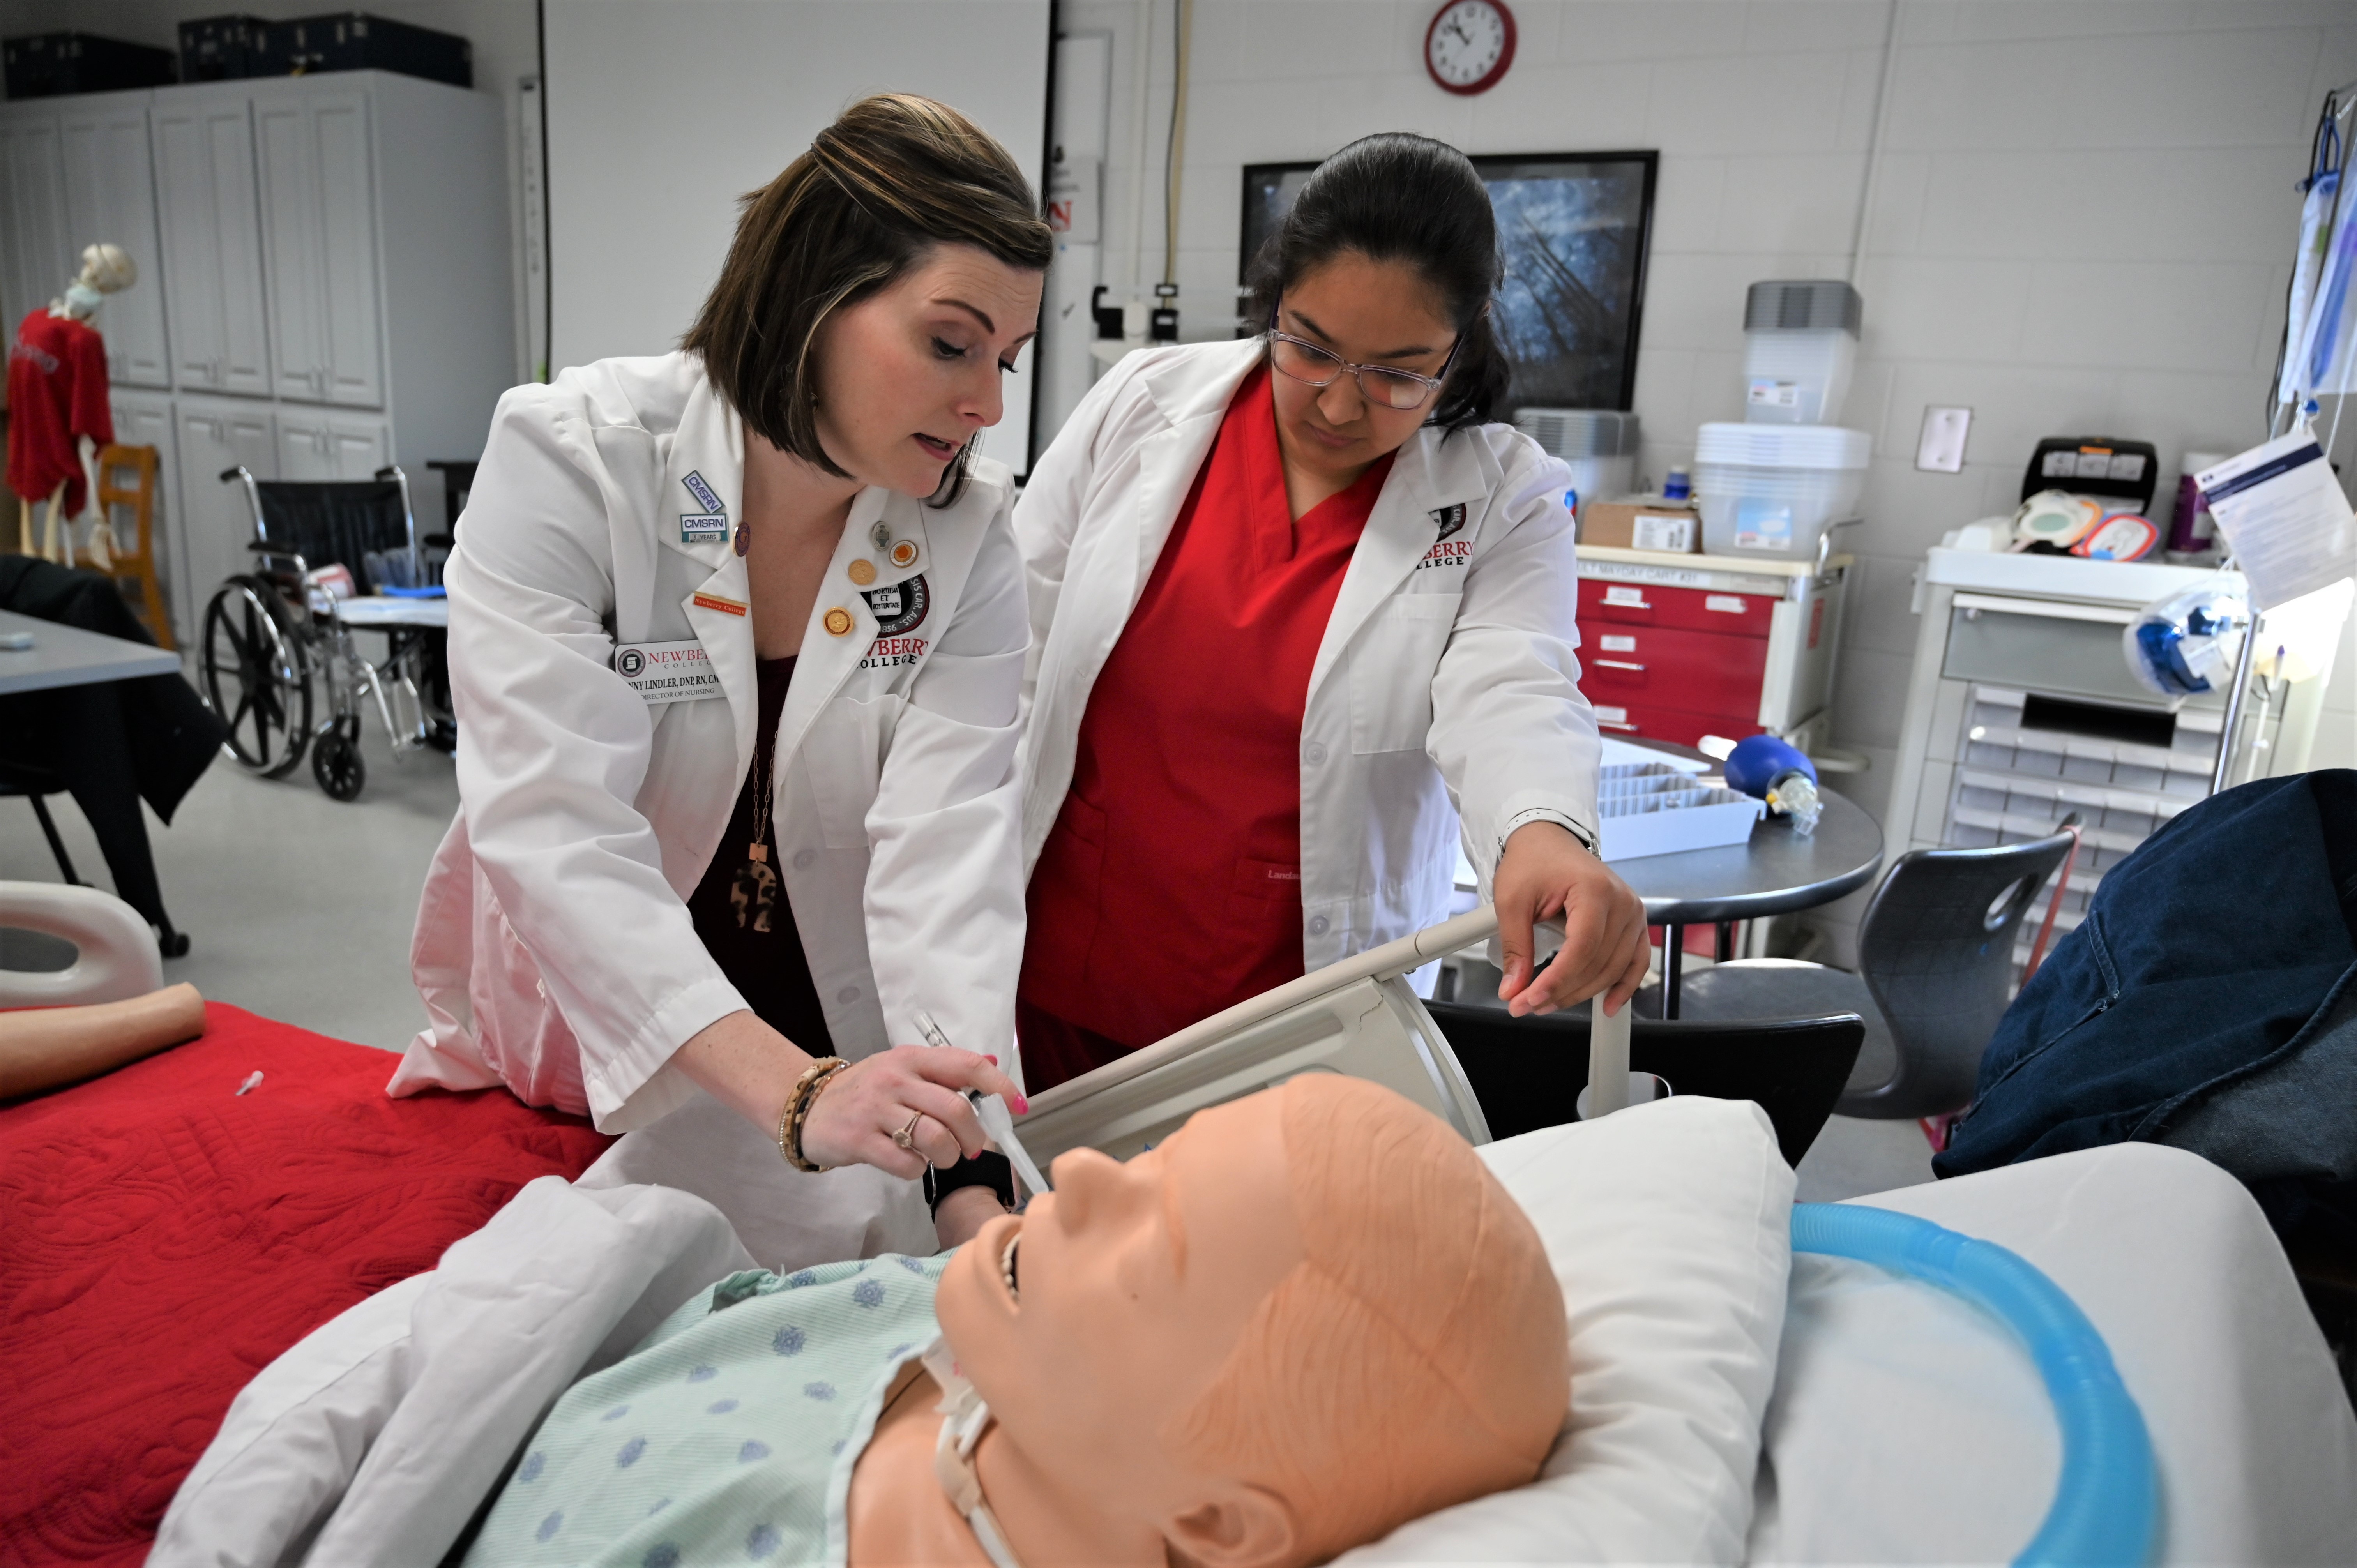 A nursing instructor and nursing student examine a model patient together in a clinical setting